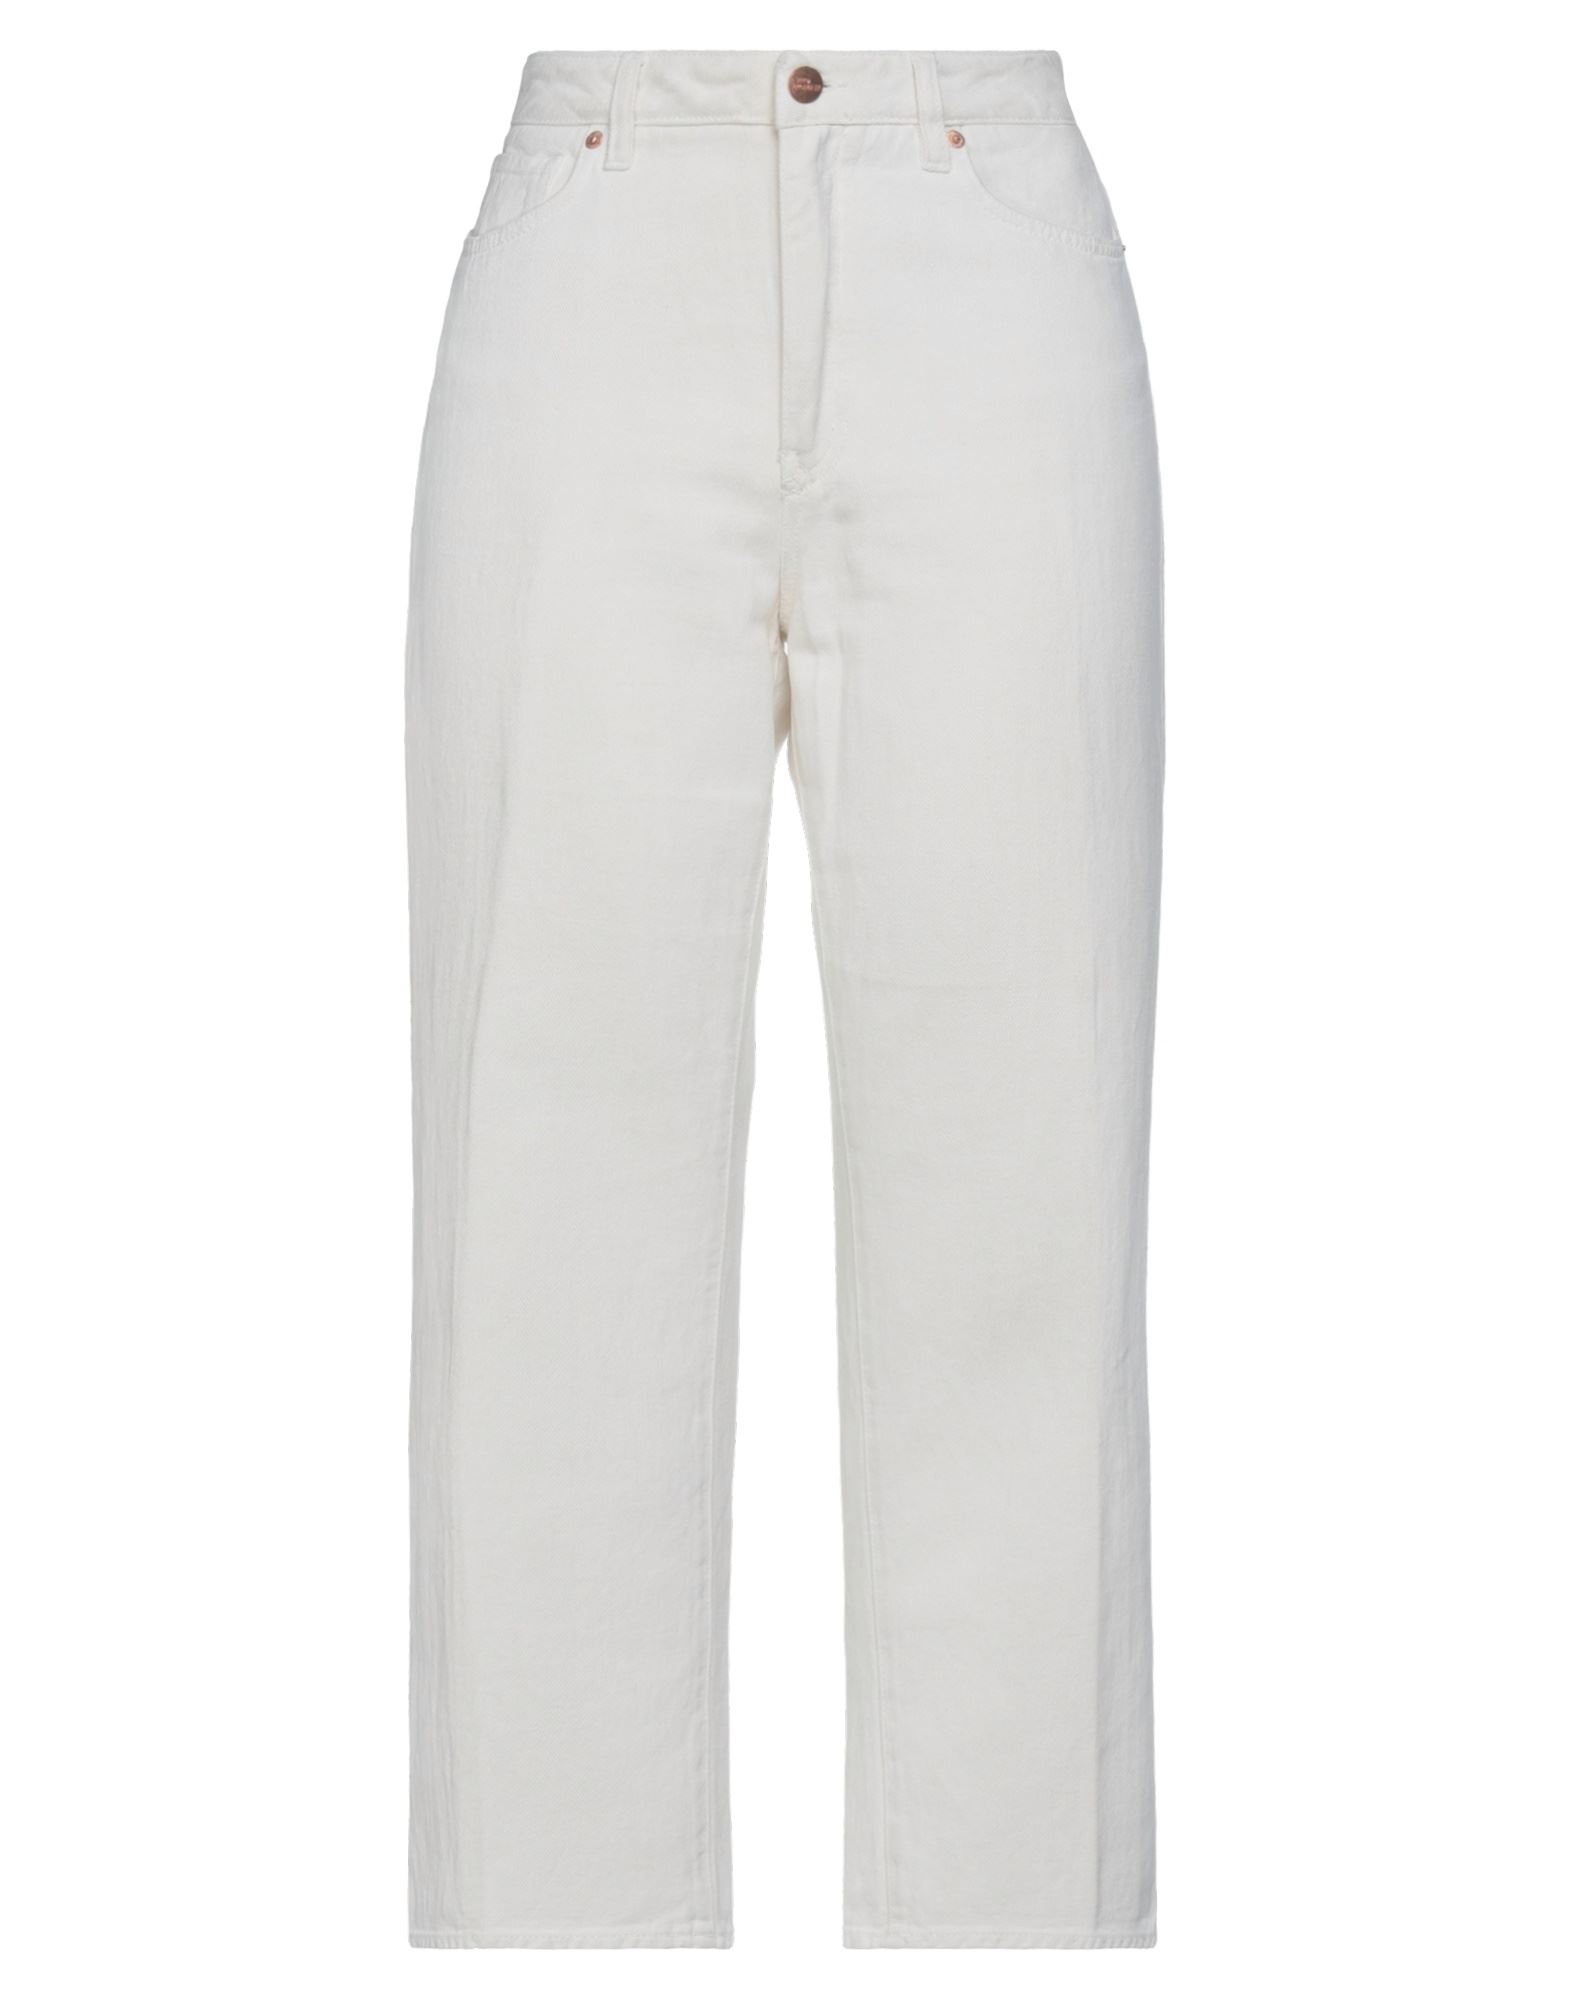 2two Pants In Ivory | ModeSens